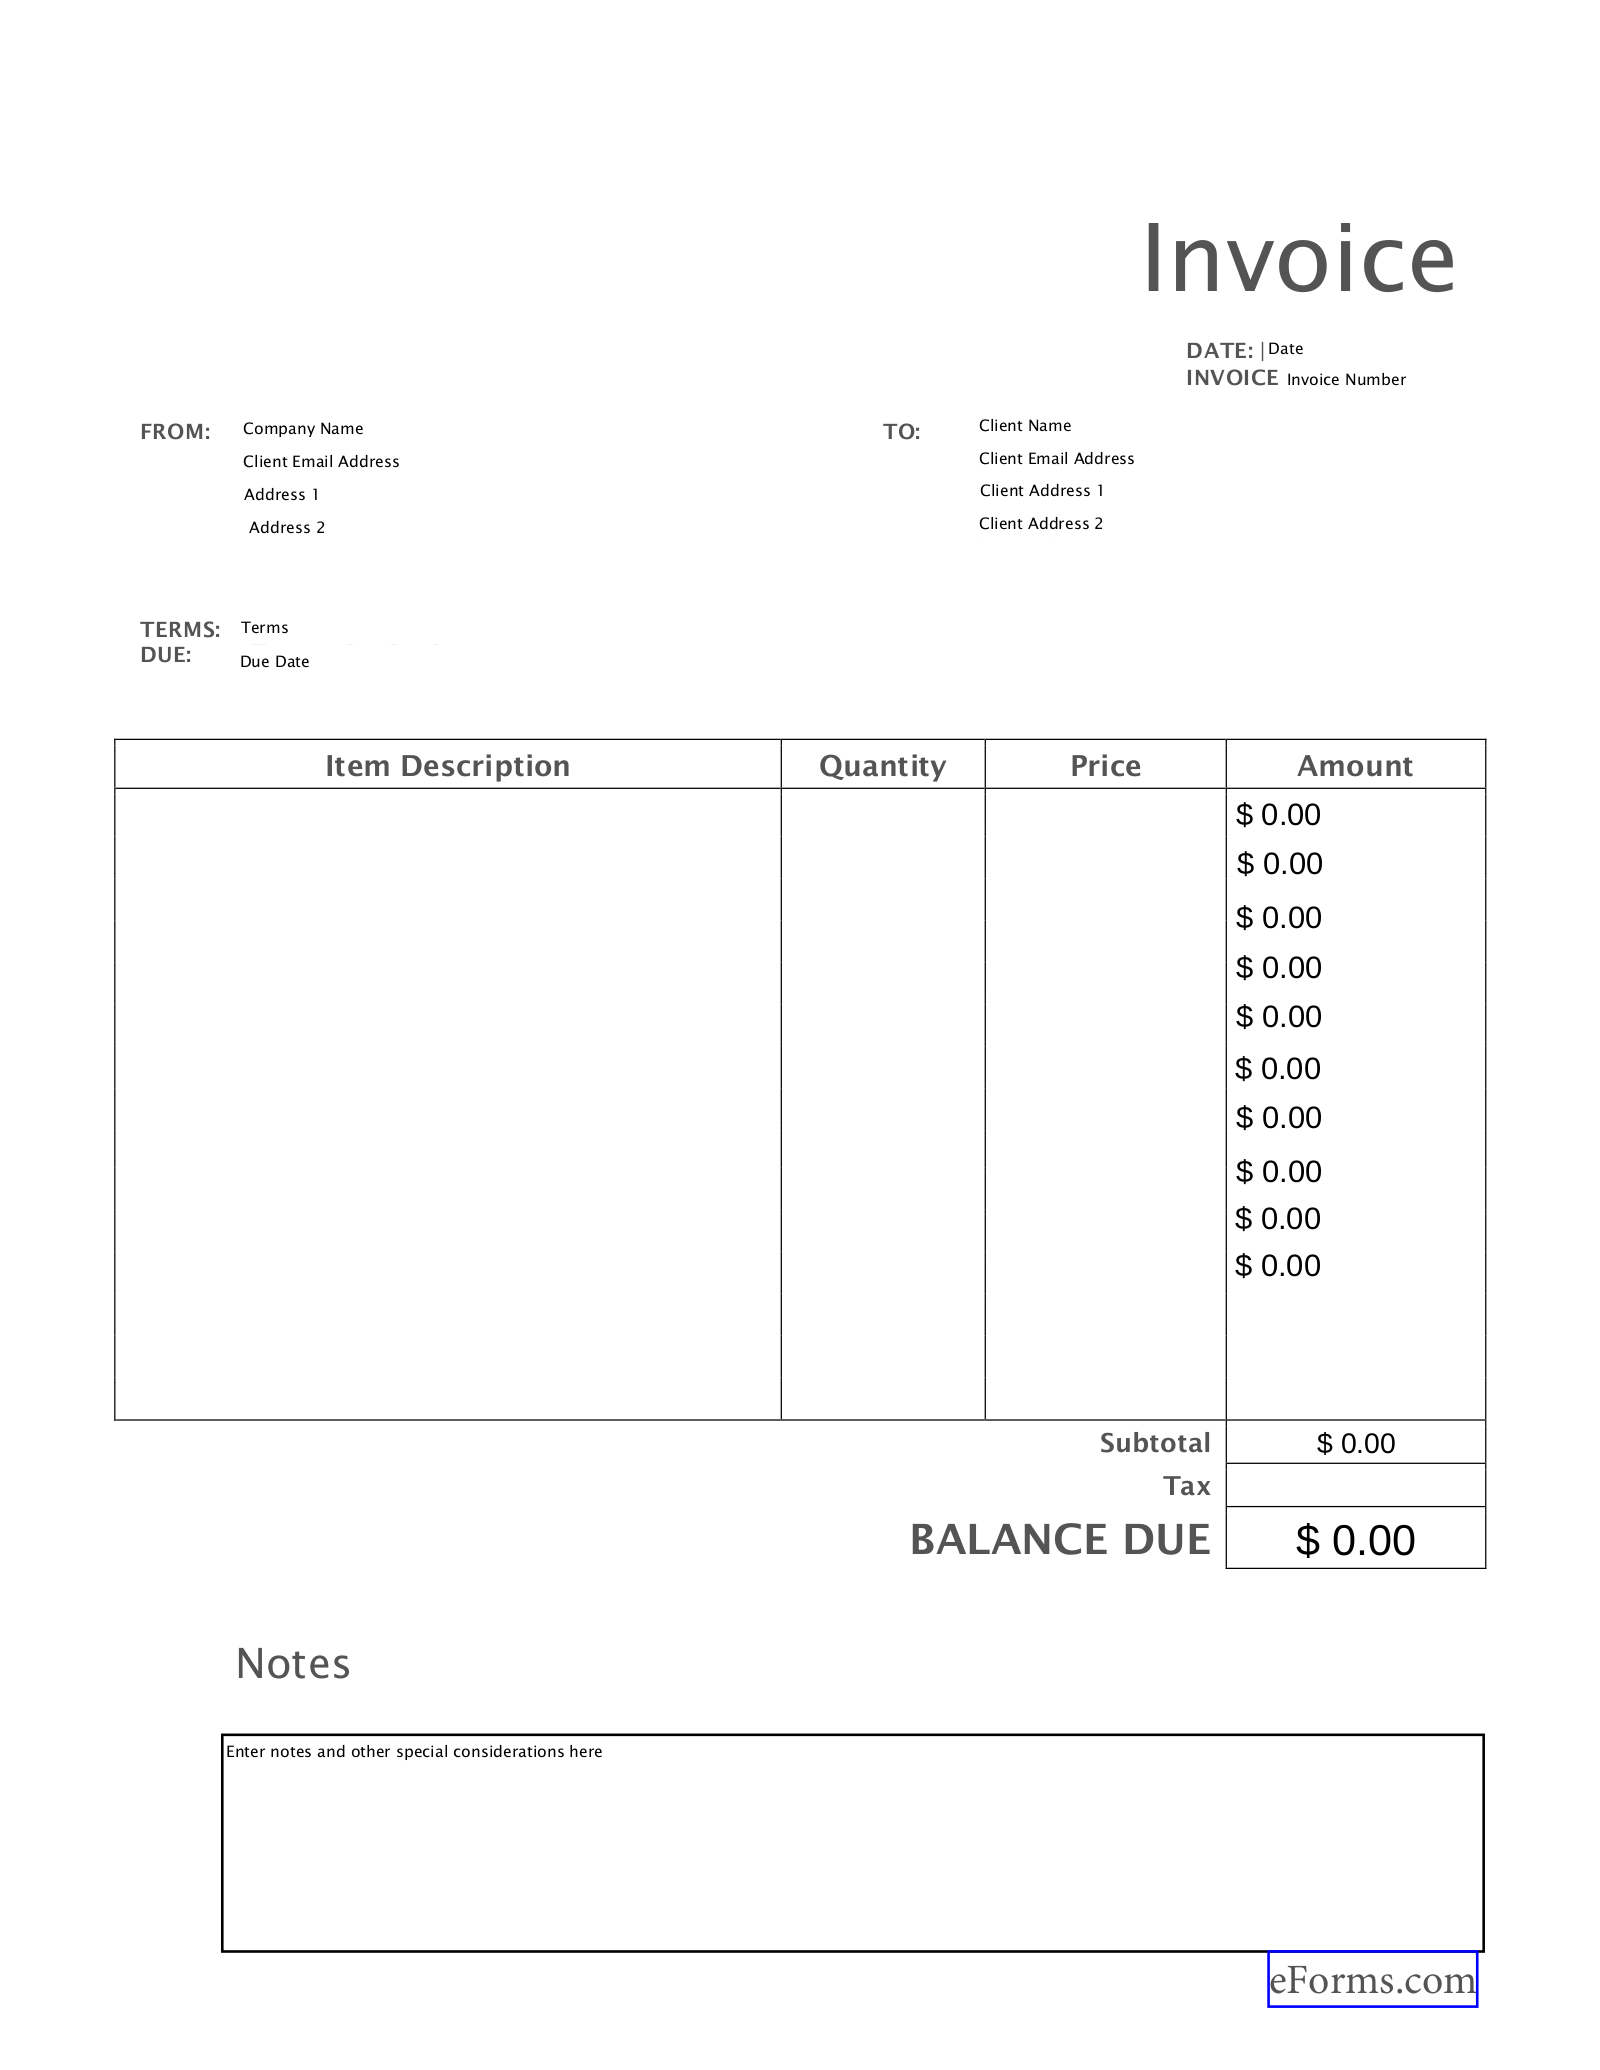 Standard Invoices Template from eforms.com